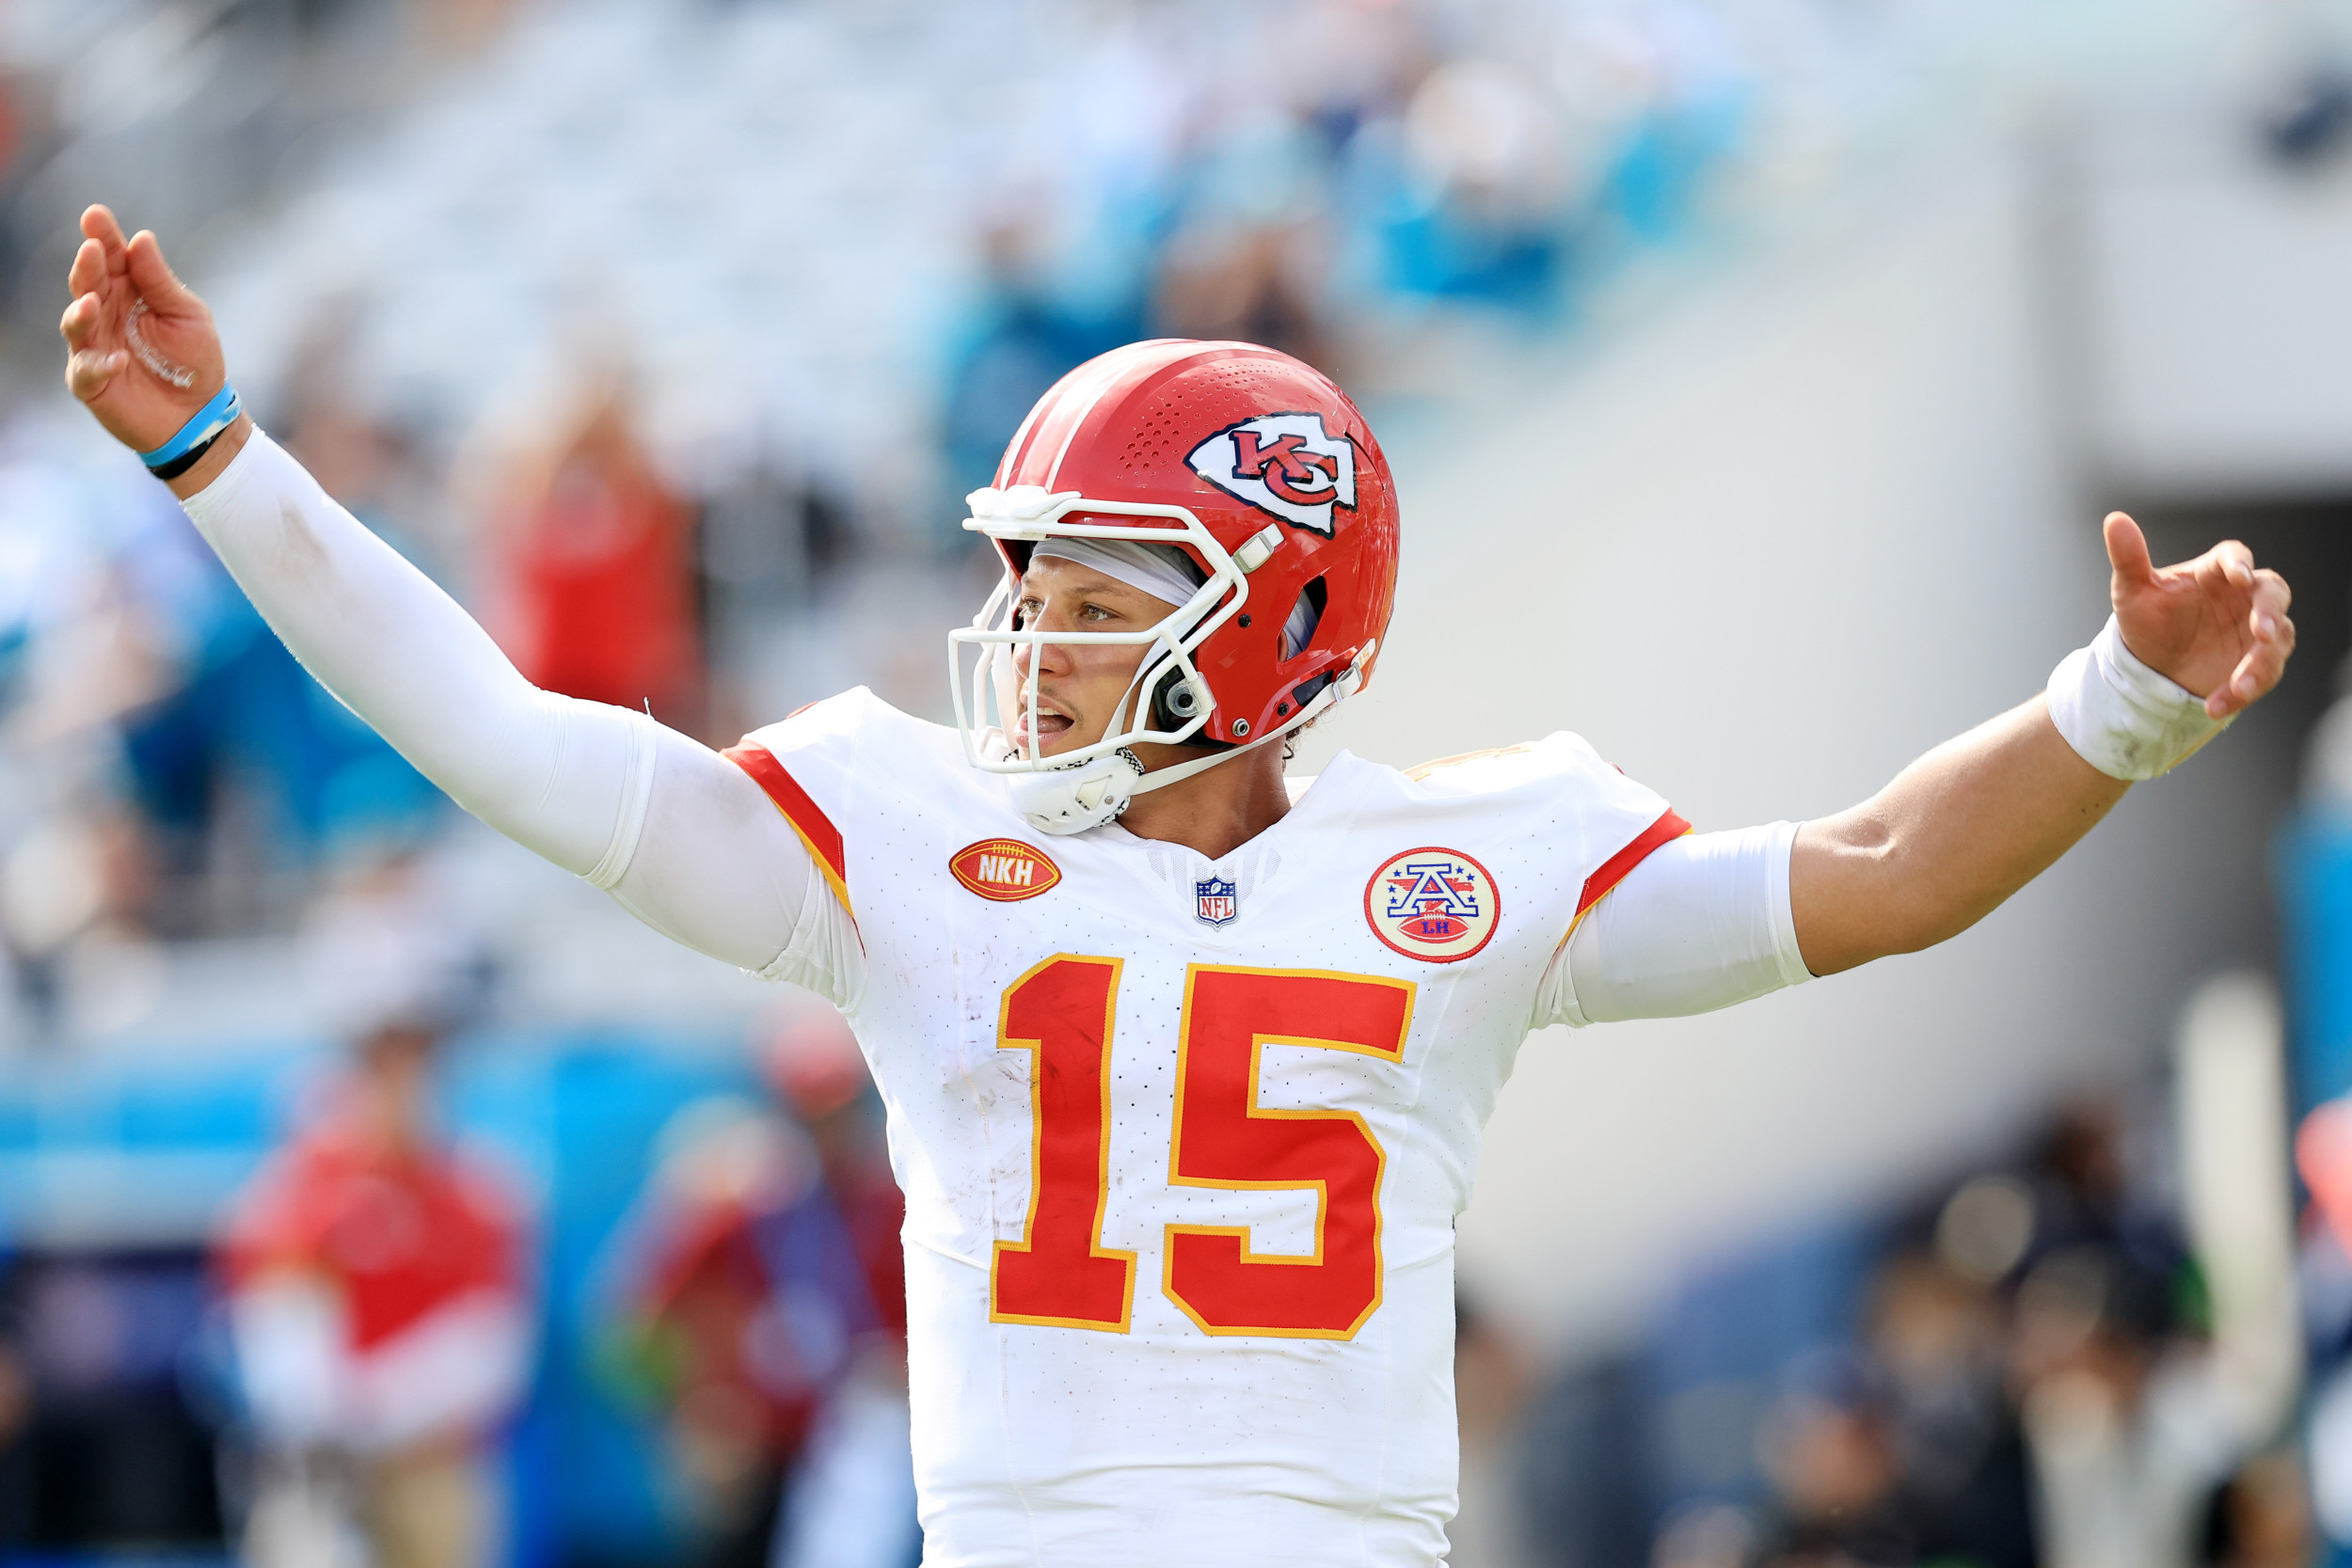 Pat Mahomes: Everything You Need To Know About the Kansas City